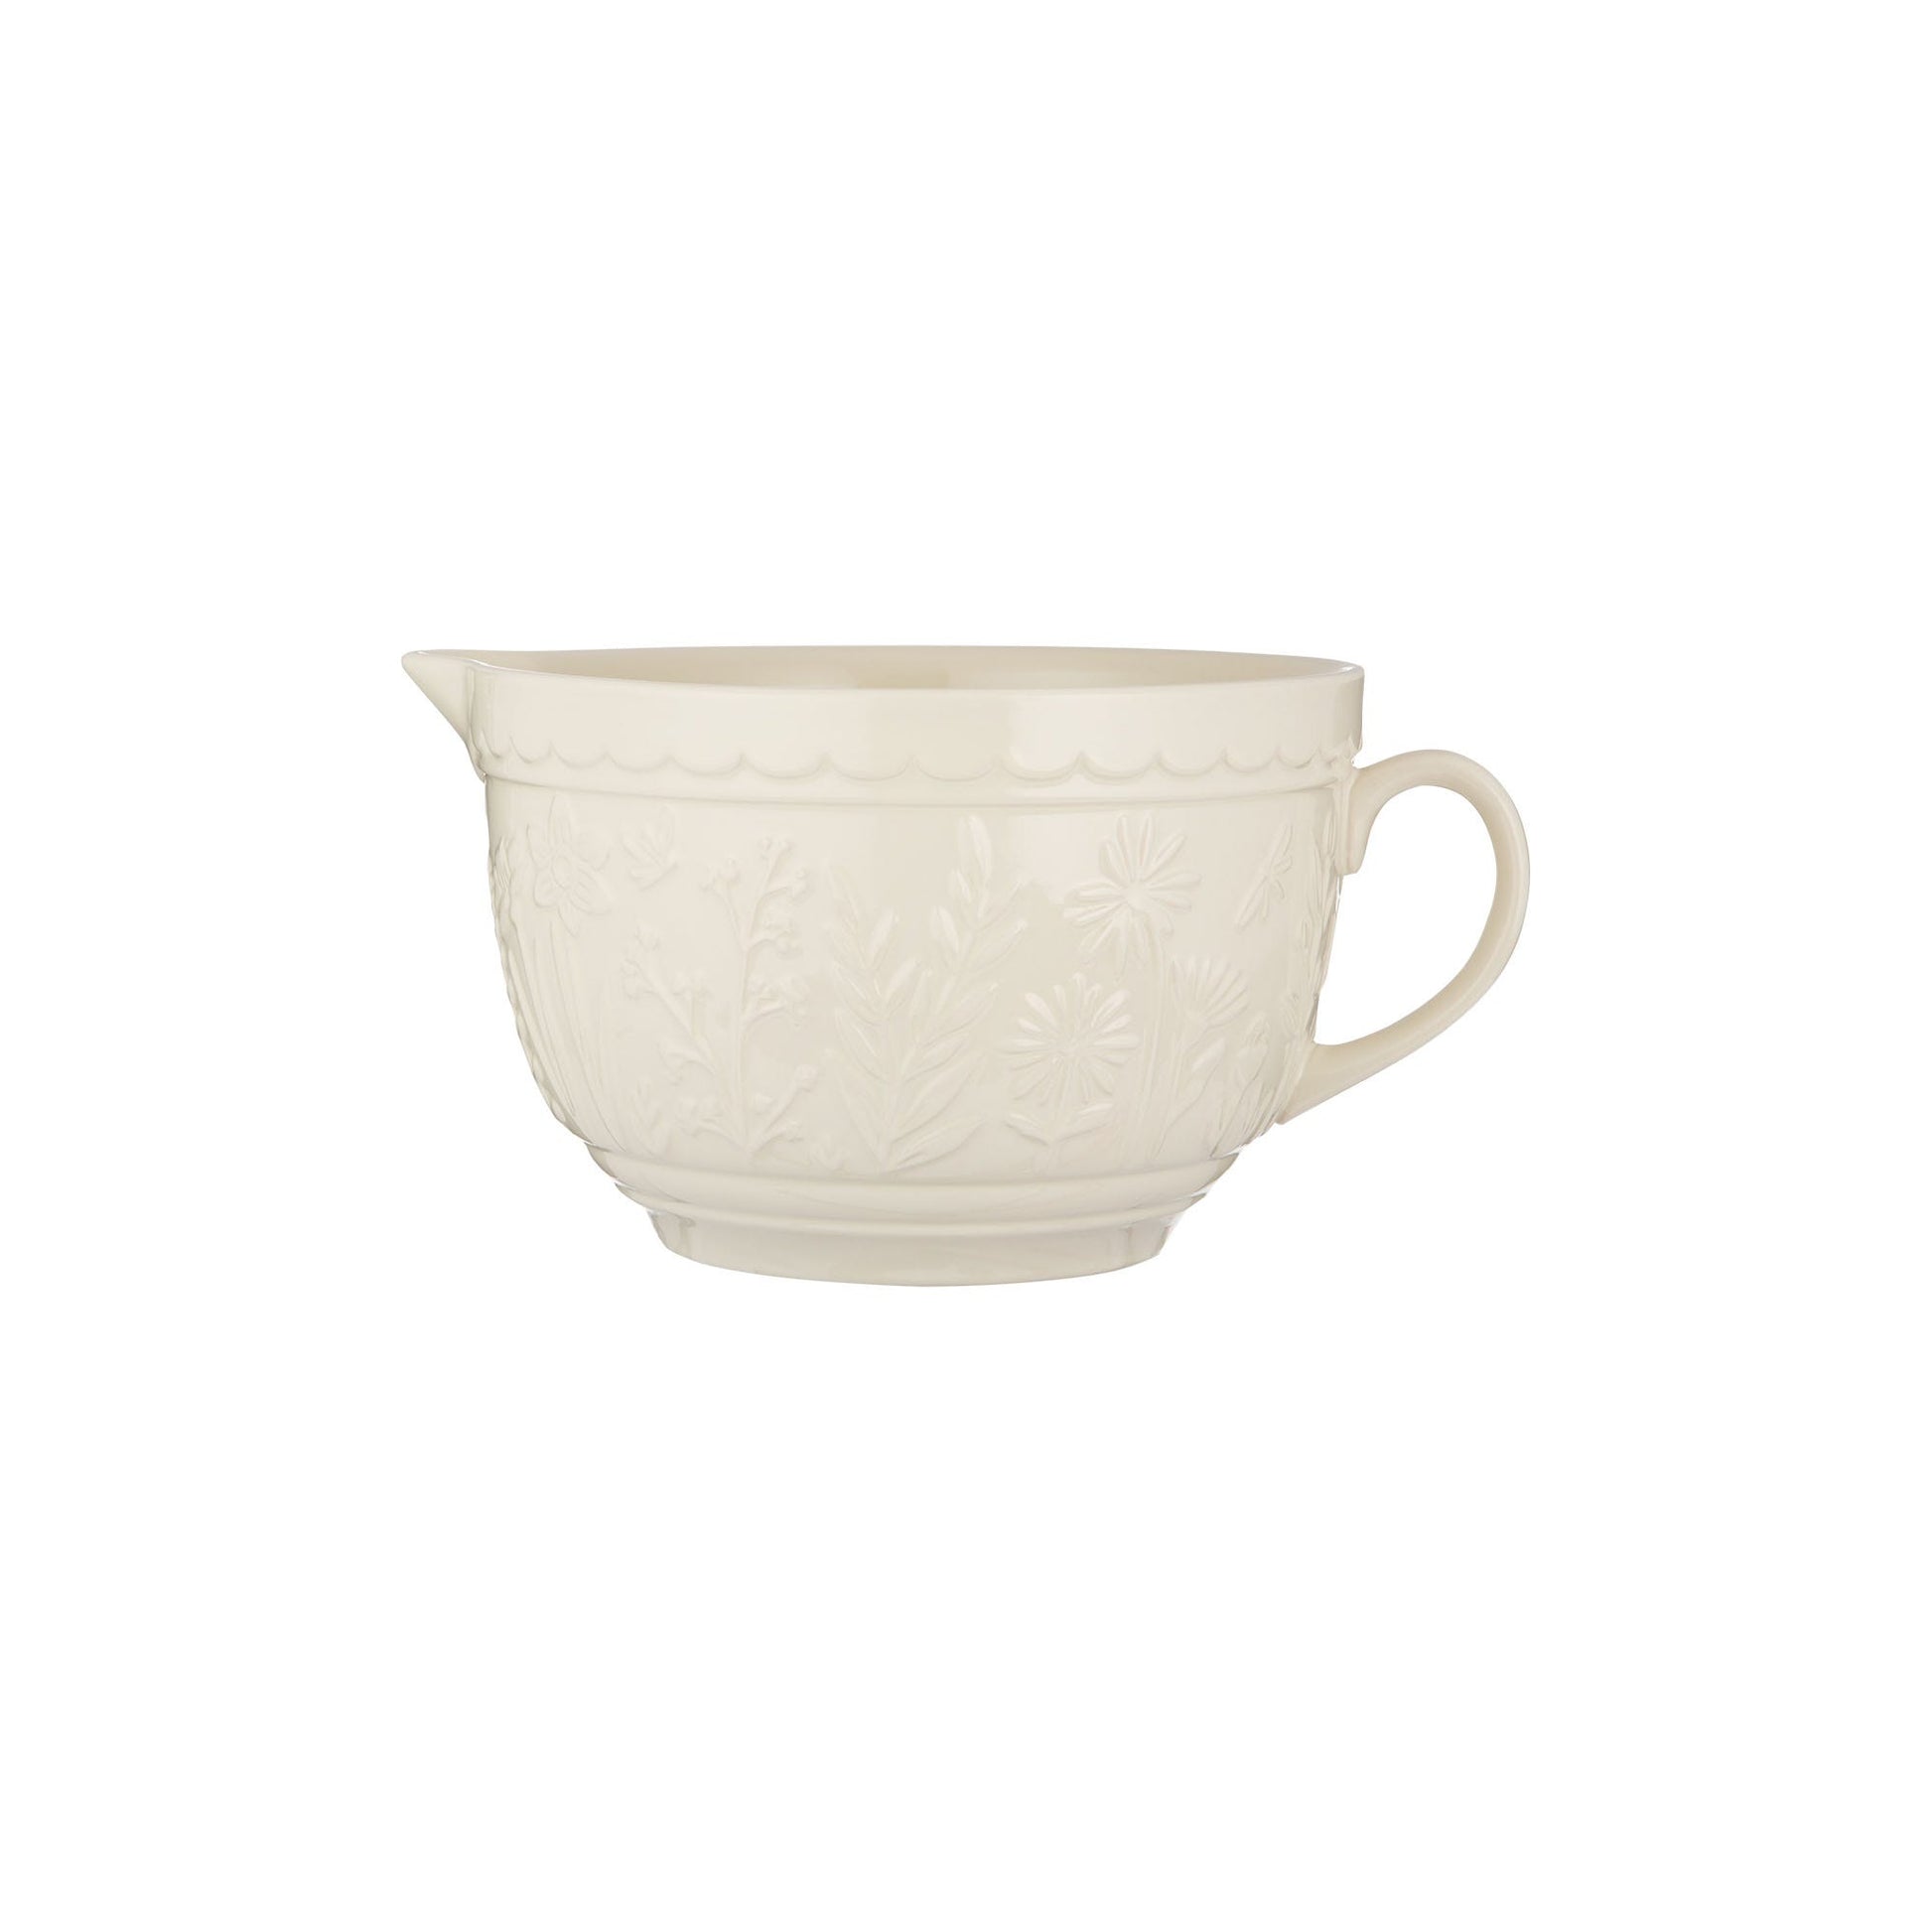 In the Meadow Cream Floral Batter Bowl on a white background.